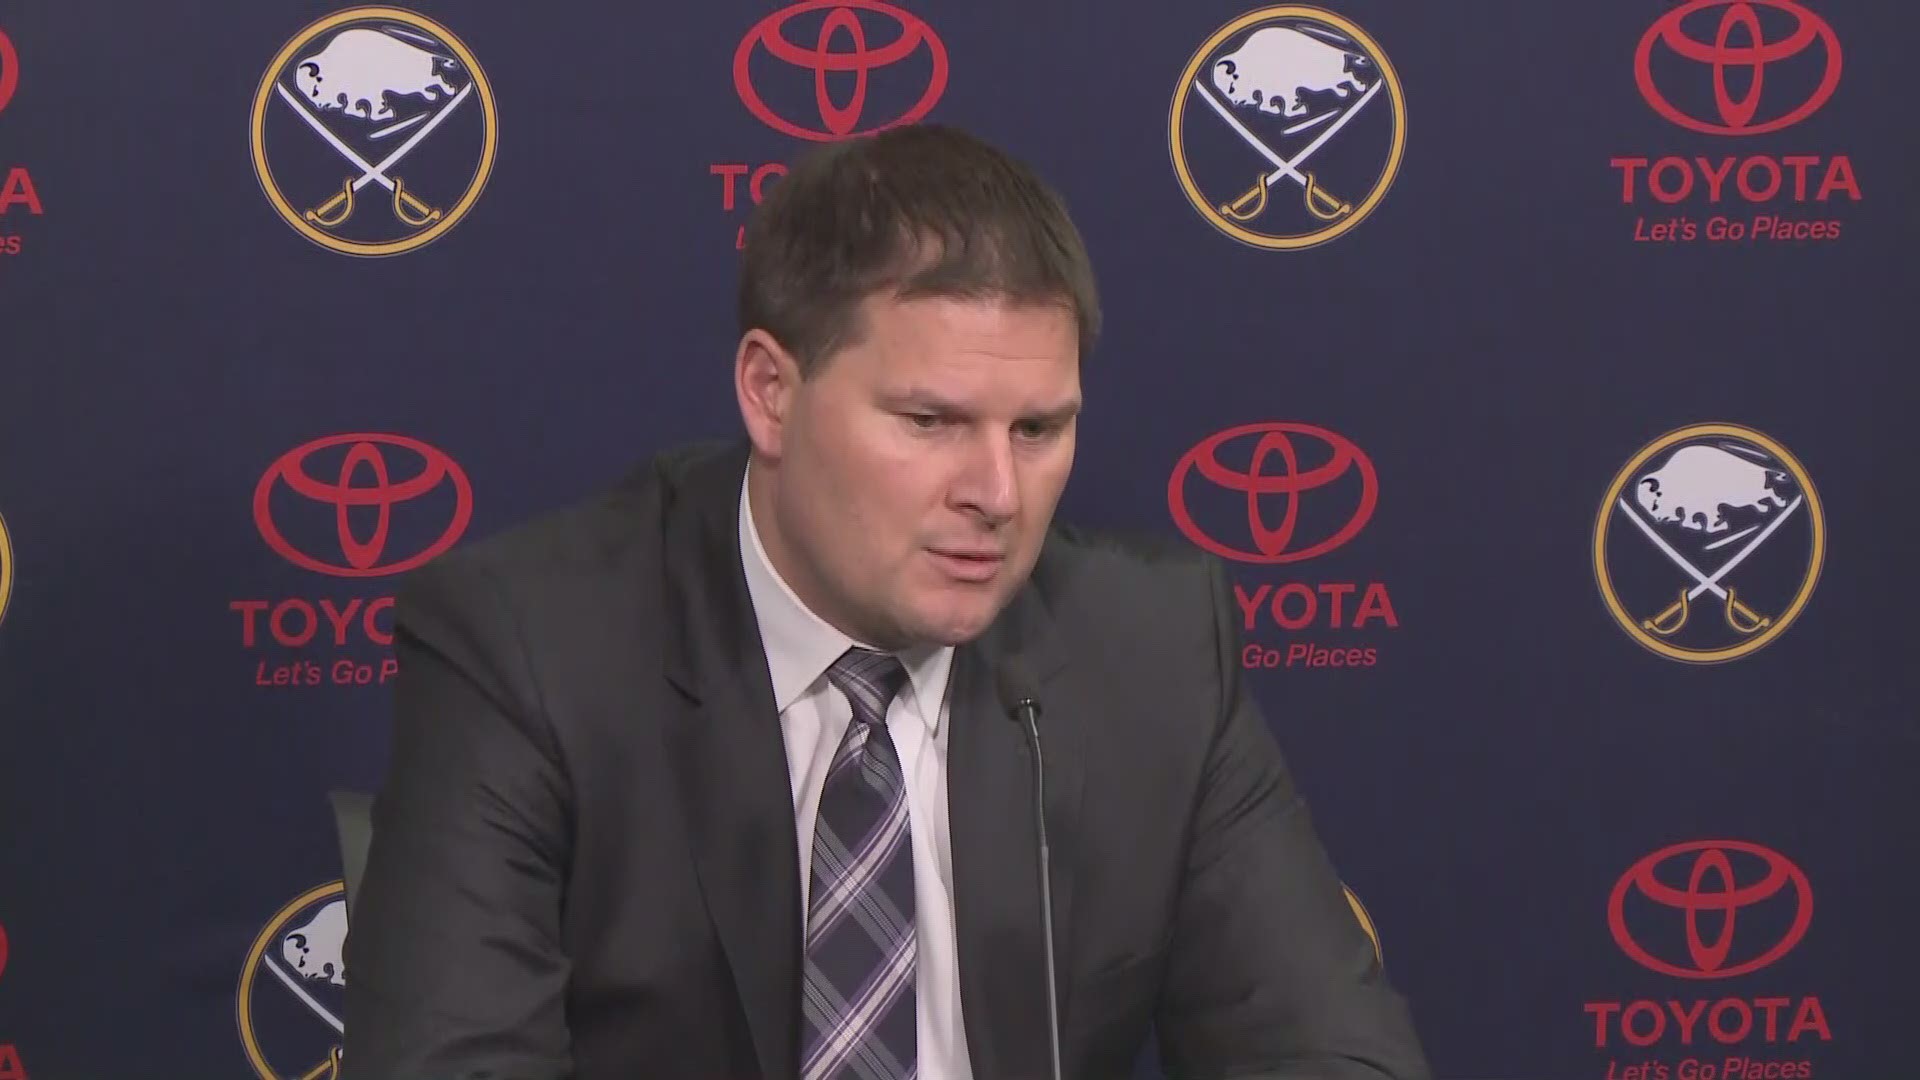 Sabres' GM Jason Botterill expresses anger and says change is coming